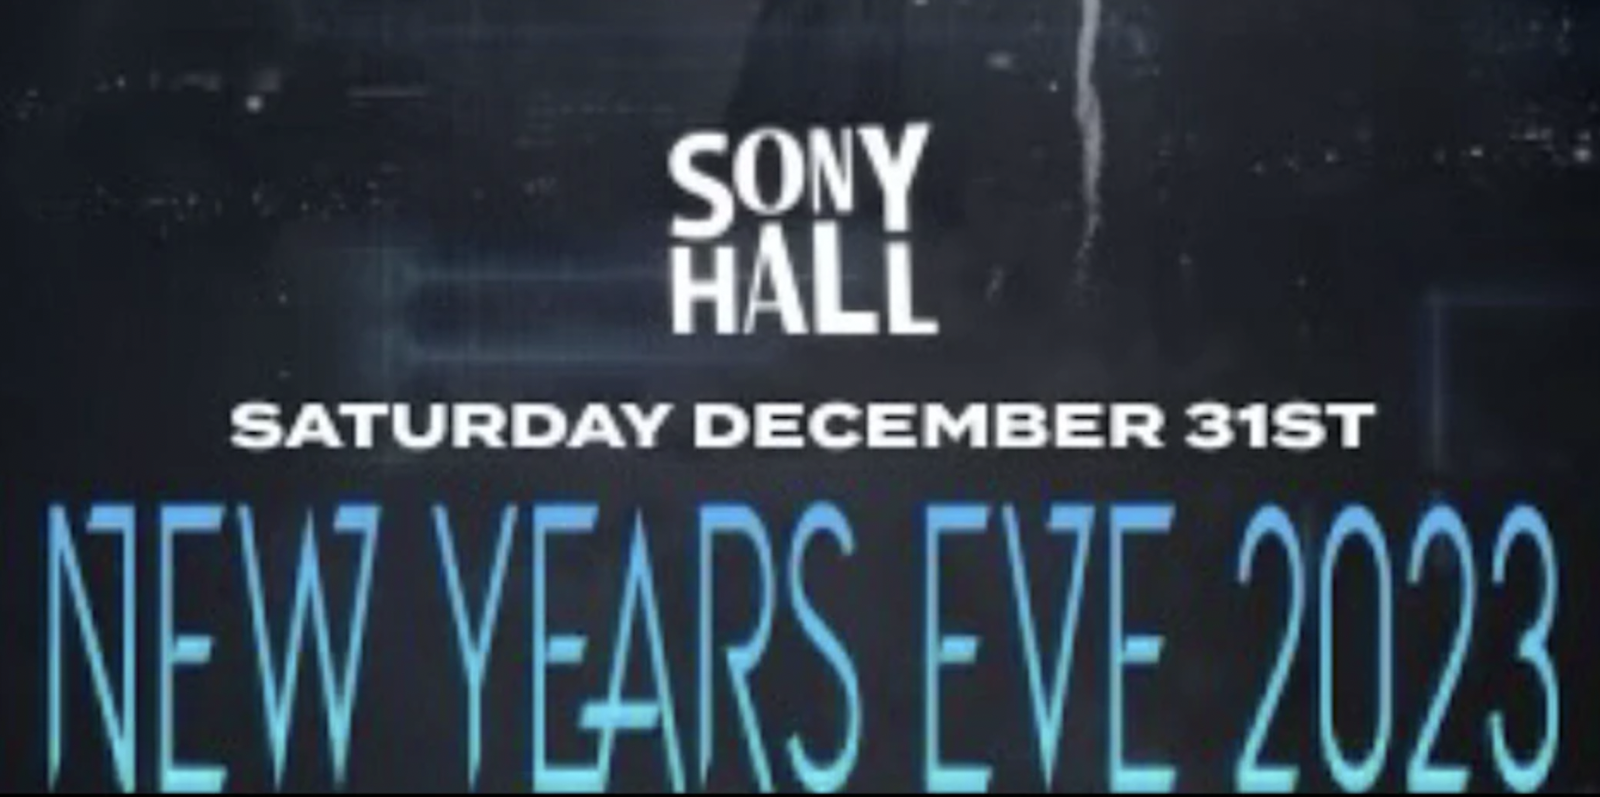 Sony Hall Hosts New Year's Eve 2023 Party 